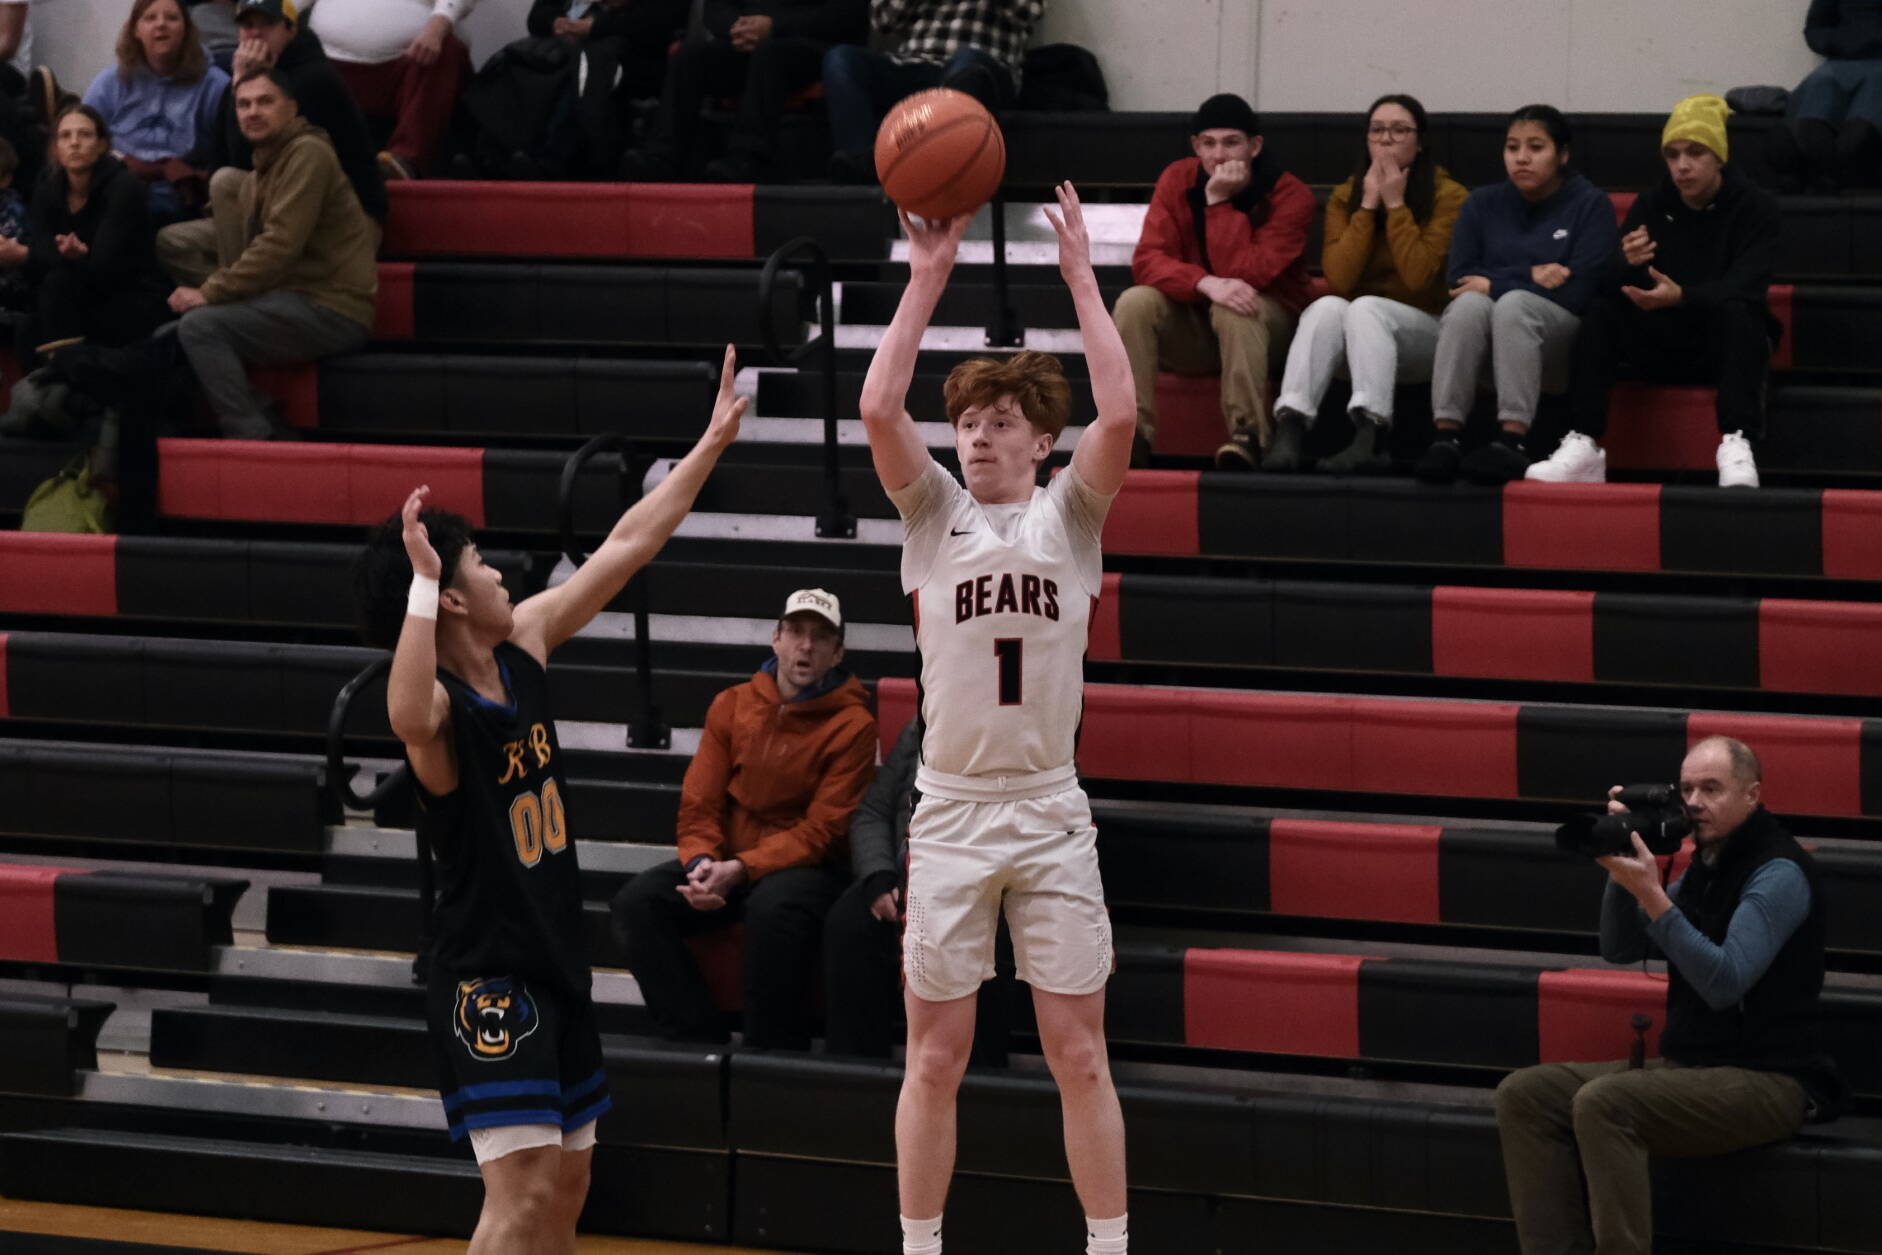 Juneau-Douglas High School: Yadaa.at Kalé junior Gavin Gerrin (1) scores from past the arc over Kodiak junior Mac Abellera (00) during the Crimson Bears 75-50 win over the Bears on Saturday at the George Houston Gymnasium. (Klas Stolpe/For the Juneau Empire)